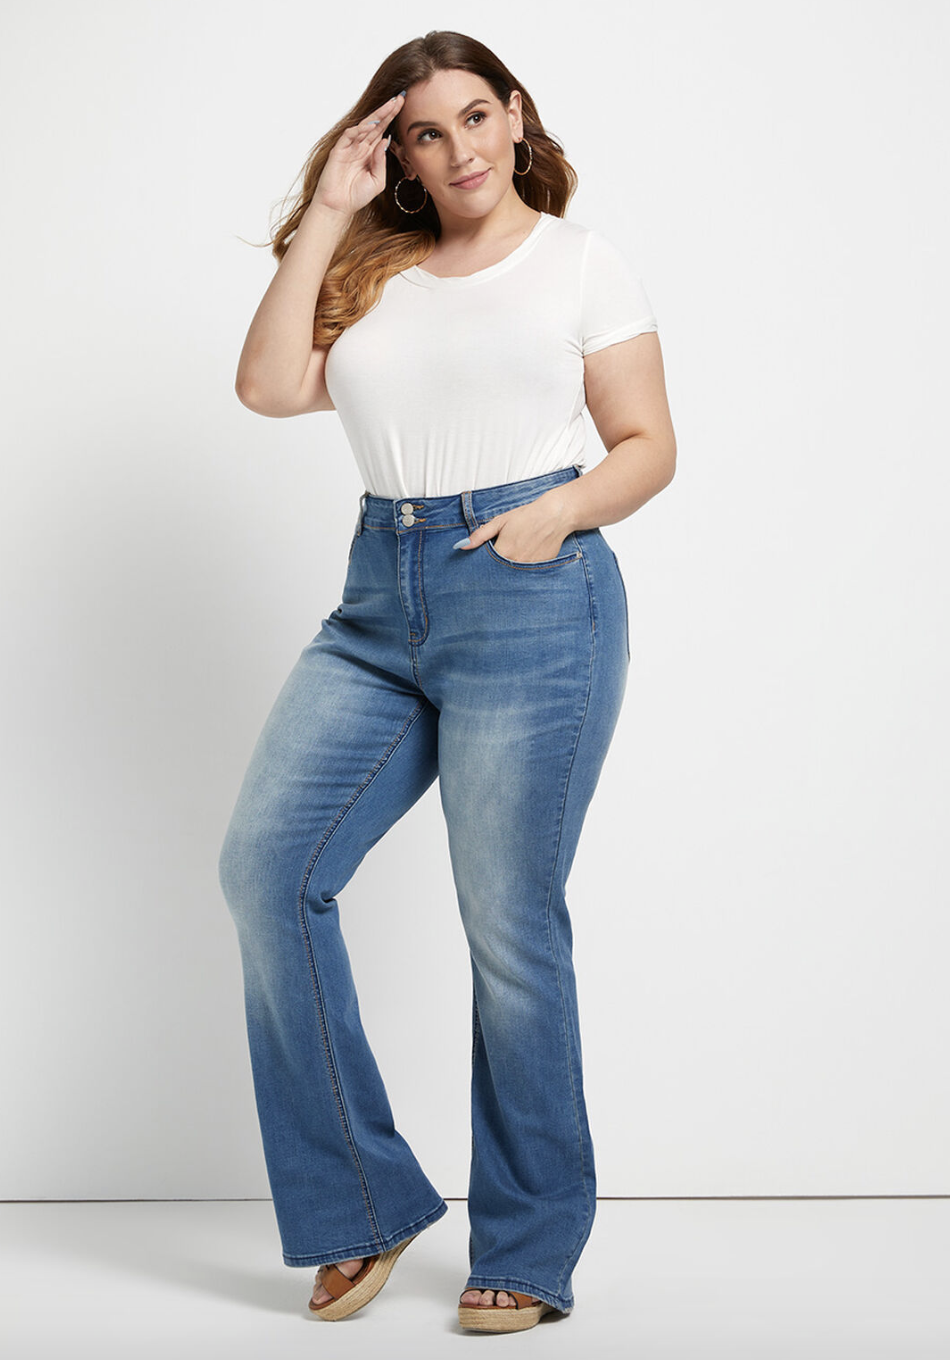 A model in medium wash, faded jeans 